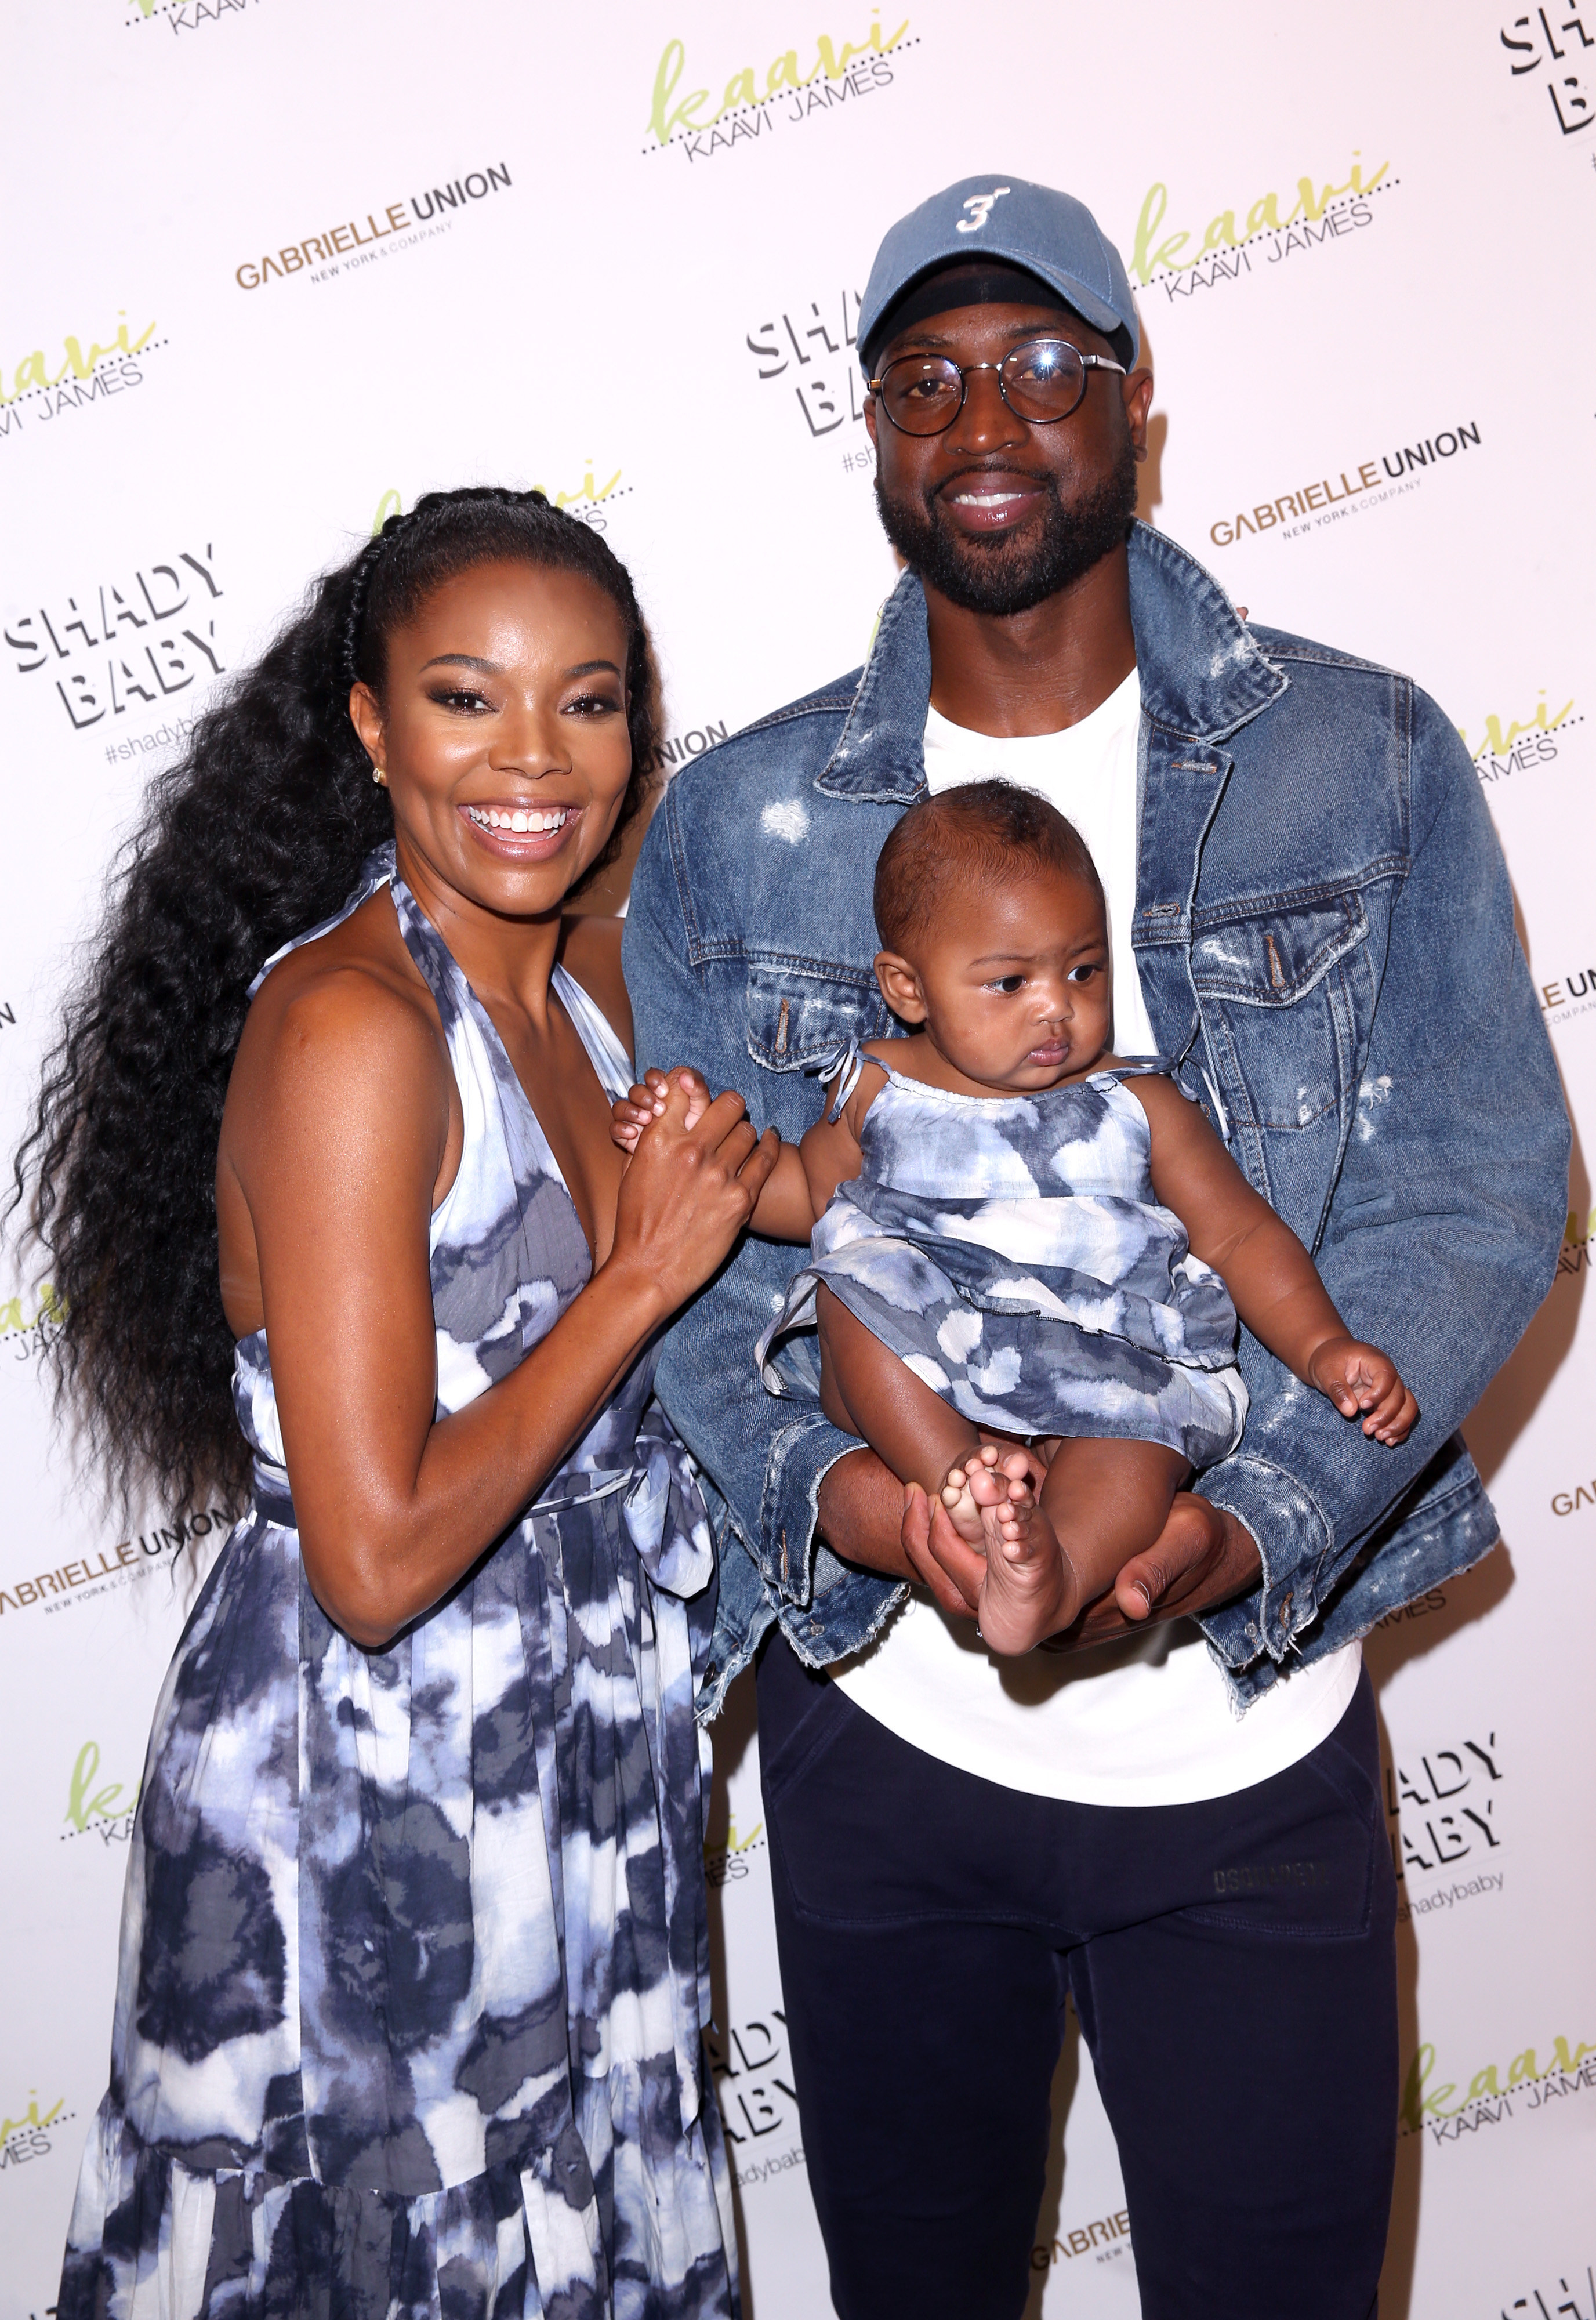 her, dwyane and the baby at an event